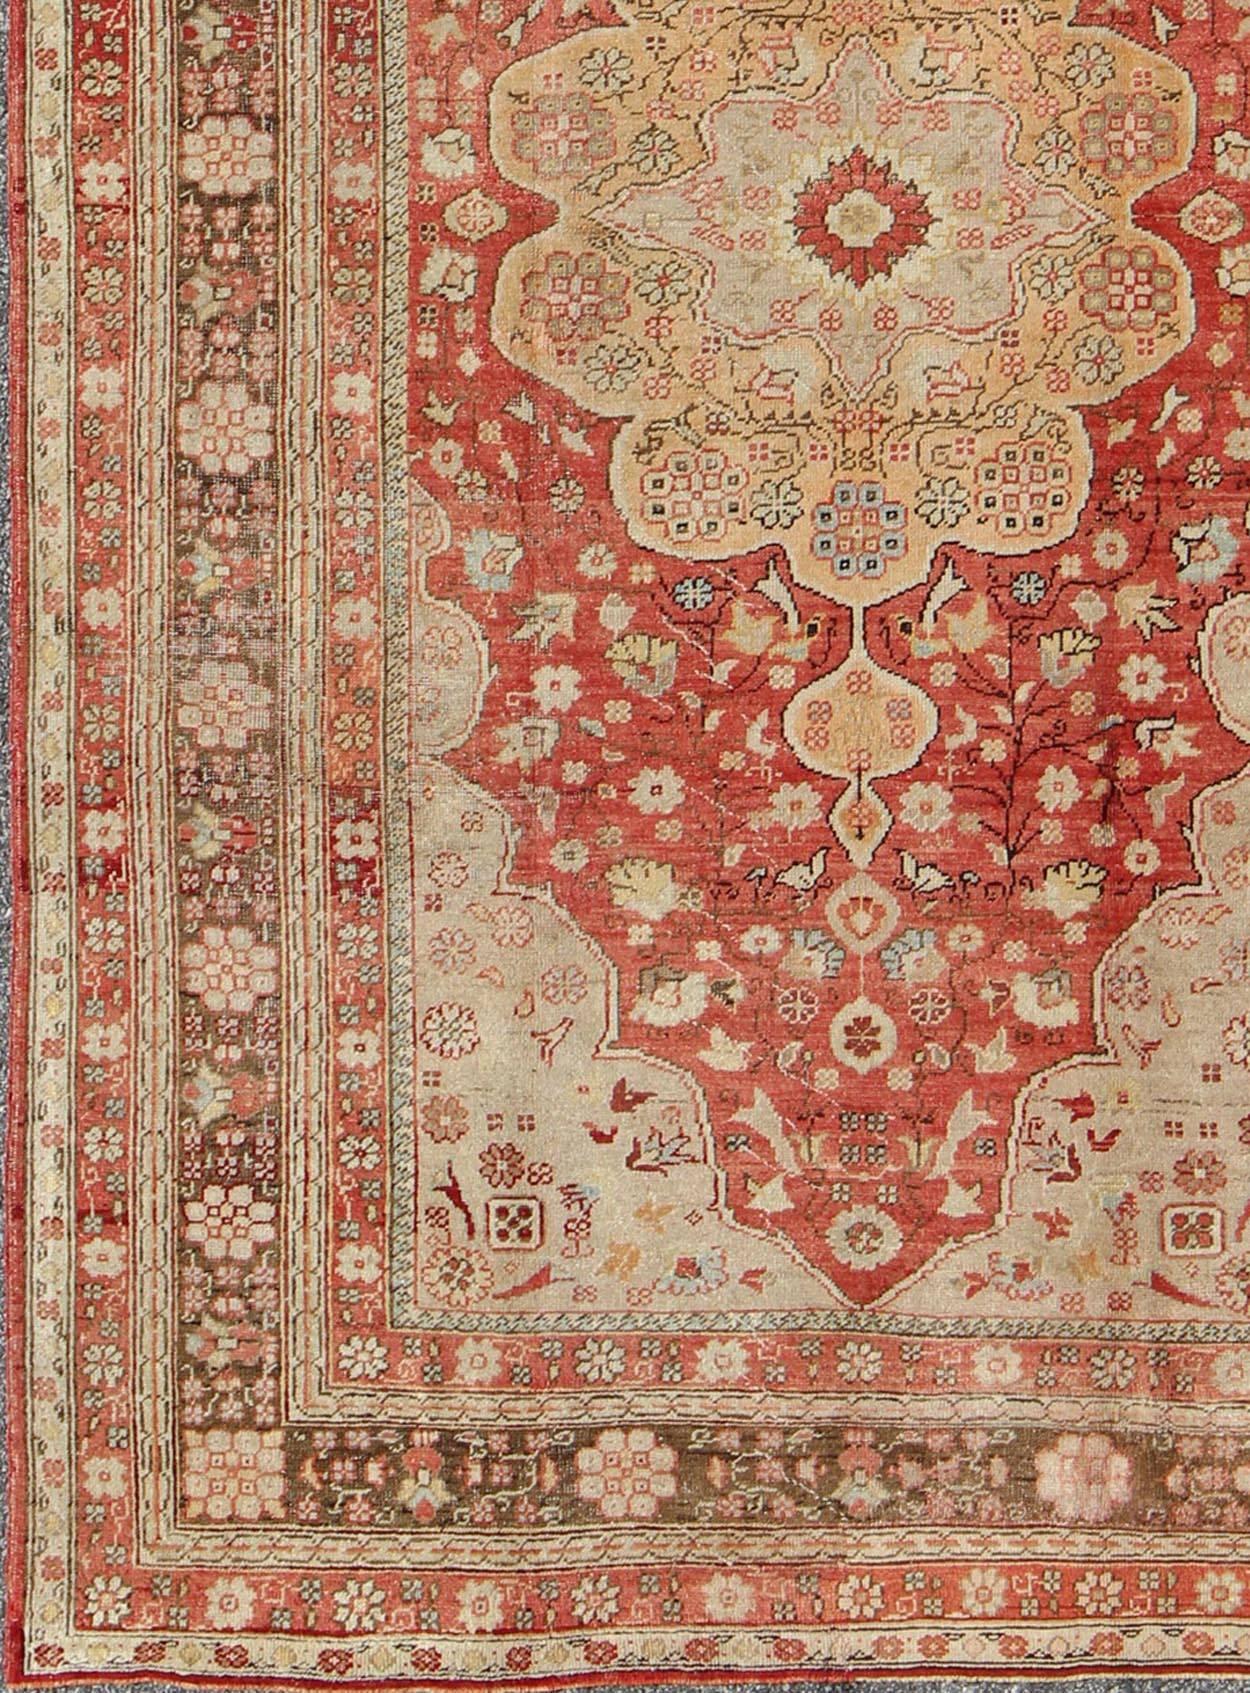 Floral Medallion Turkish Oushak antique rug in red, brown and Tan rug el-14703, country of origin / type: Turkey / Oushak, circa 1920

This stunning antique Turkish Oushak carpet (circa 1920) features a central medallion and floral motifs throughout